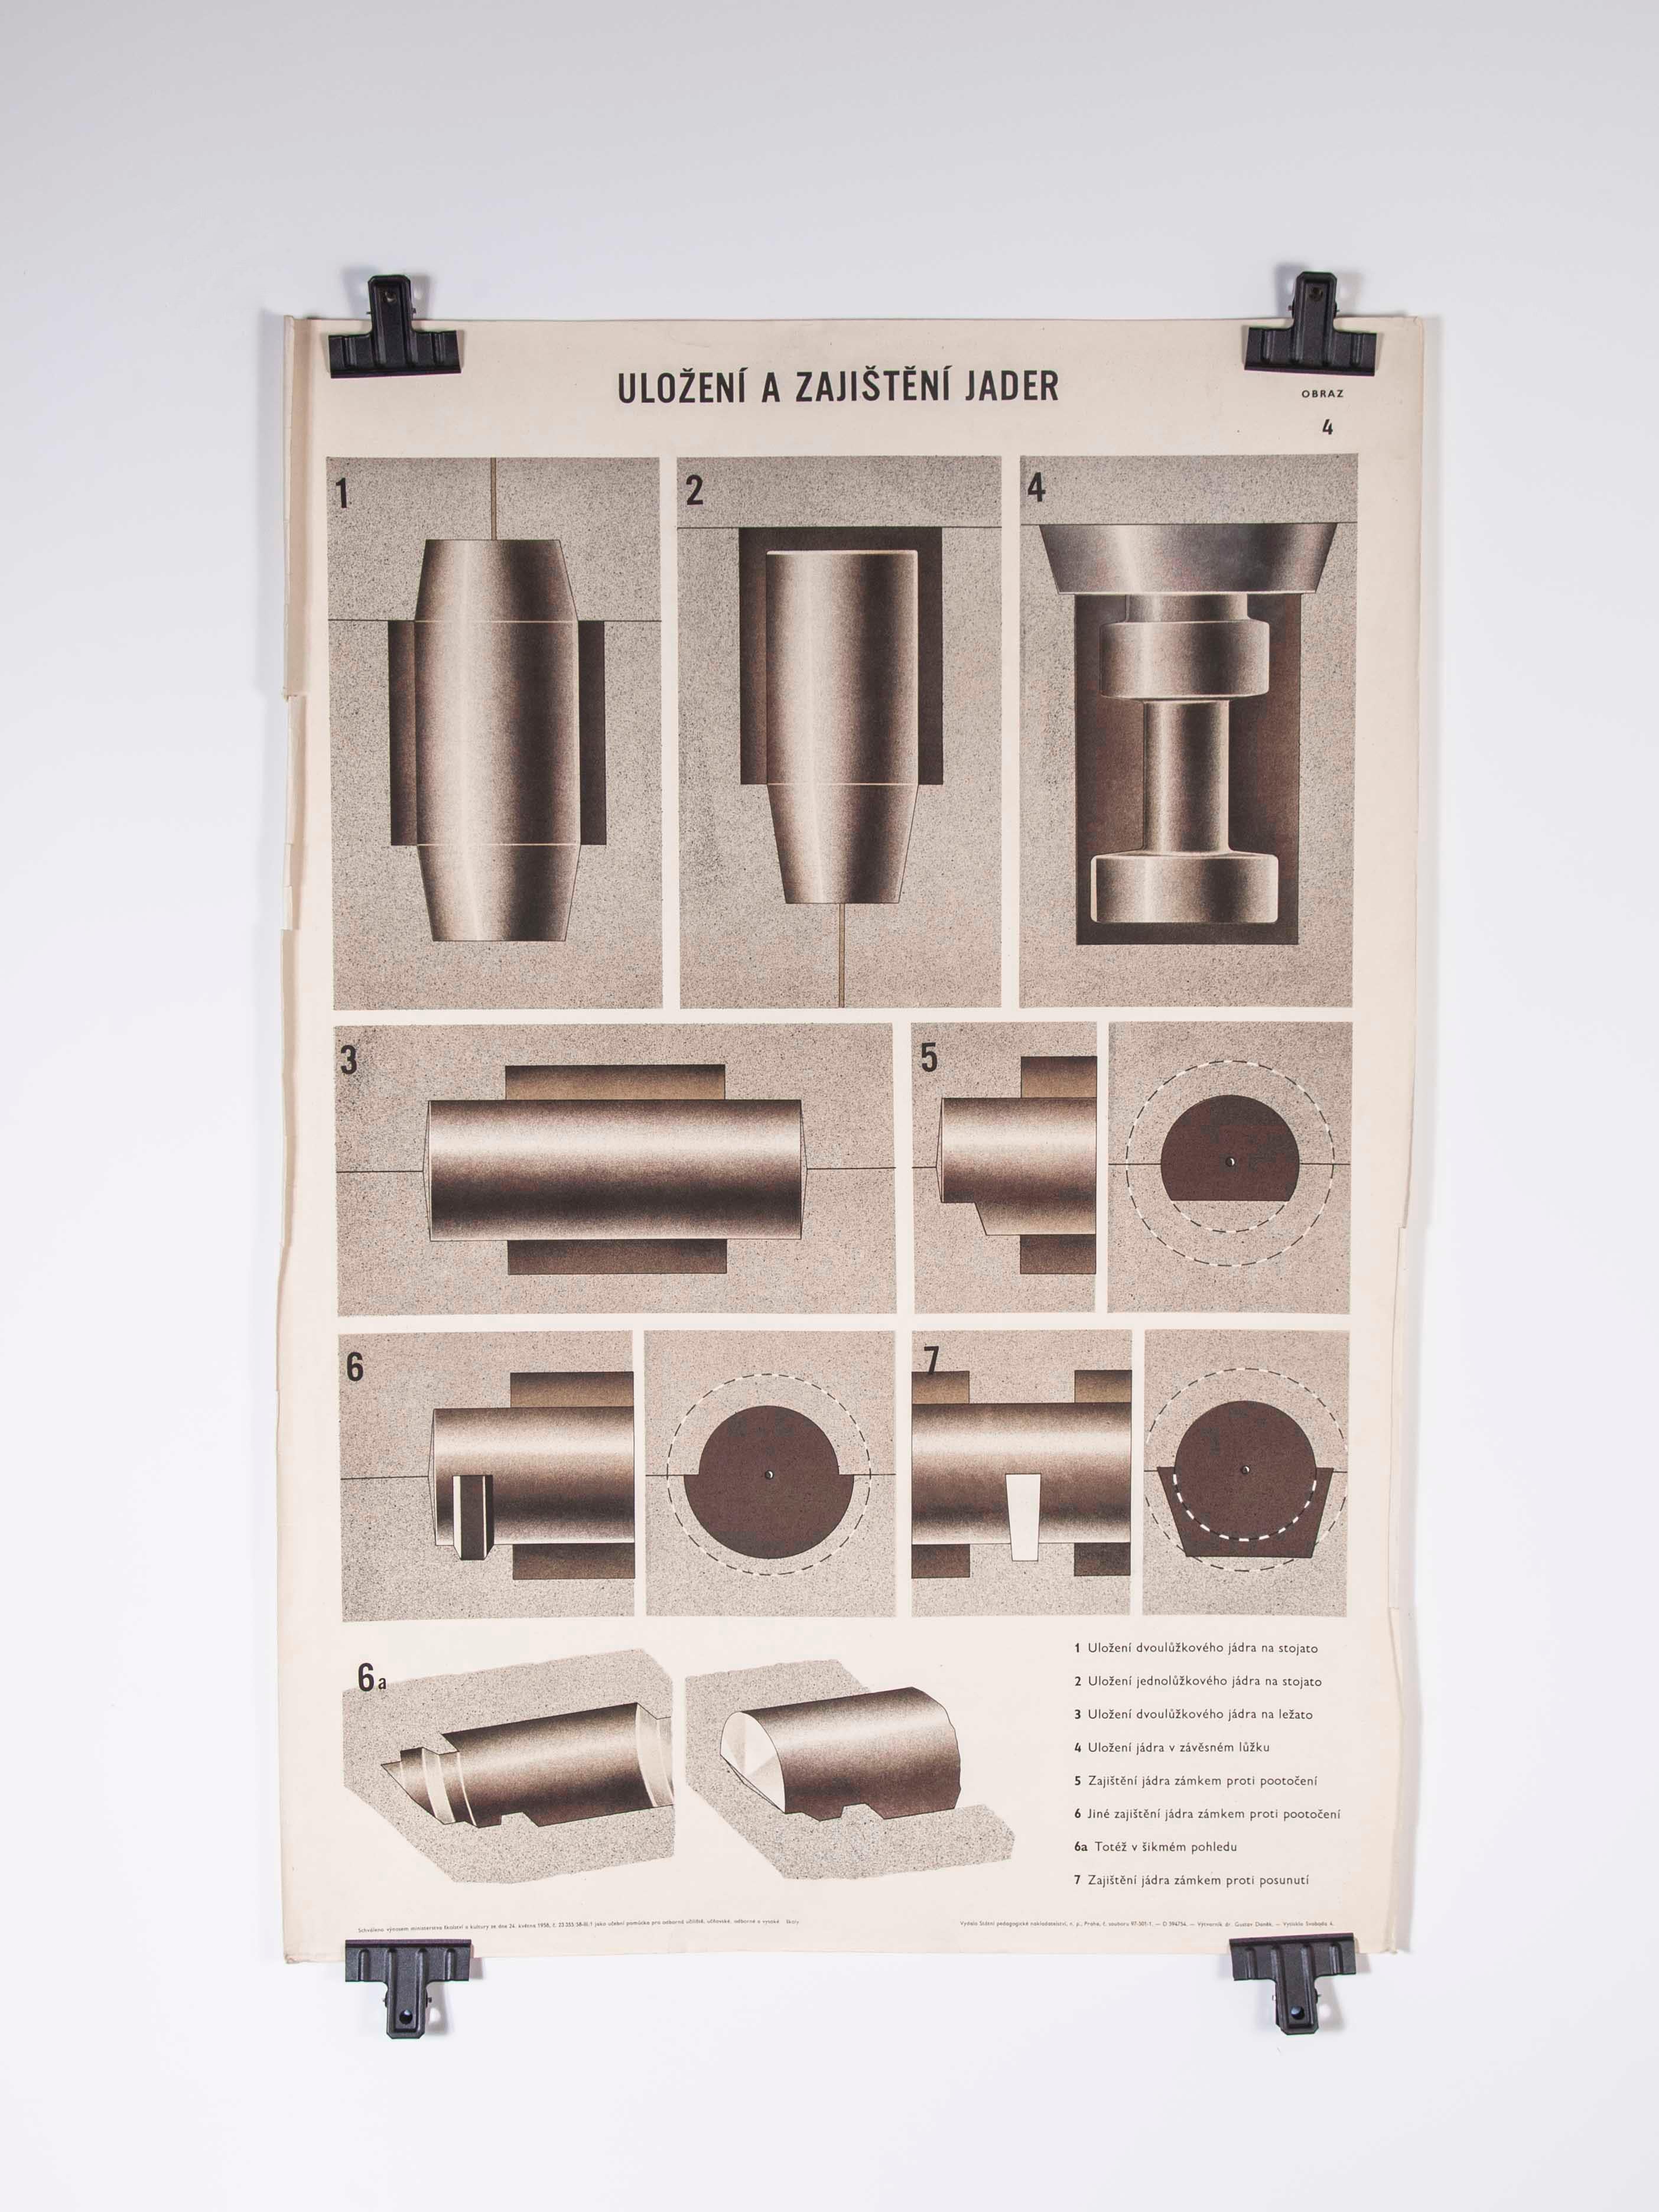 Czech Technical Industrial drawing, foundry mould engineering poster, 5

Sourced from an old engineering workshop in the Czech Republic, an amazing series of technical industrial drawings explaining the process of sand casting and creating the